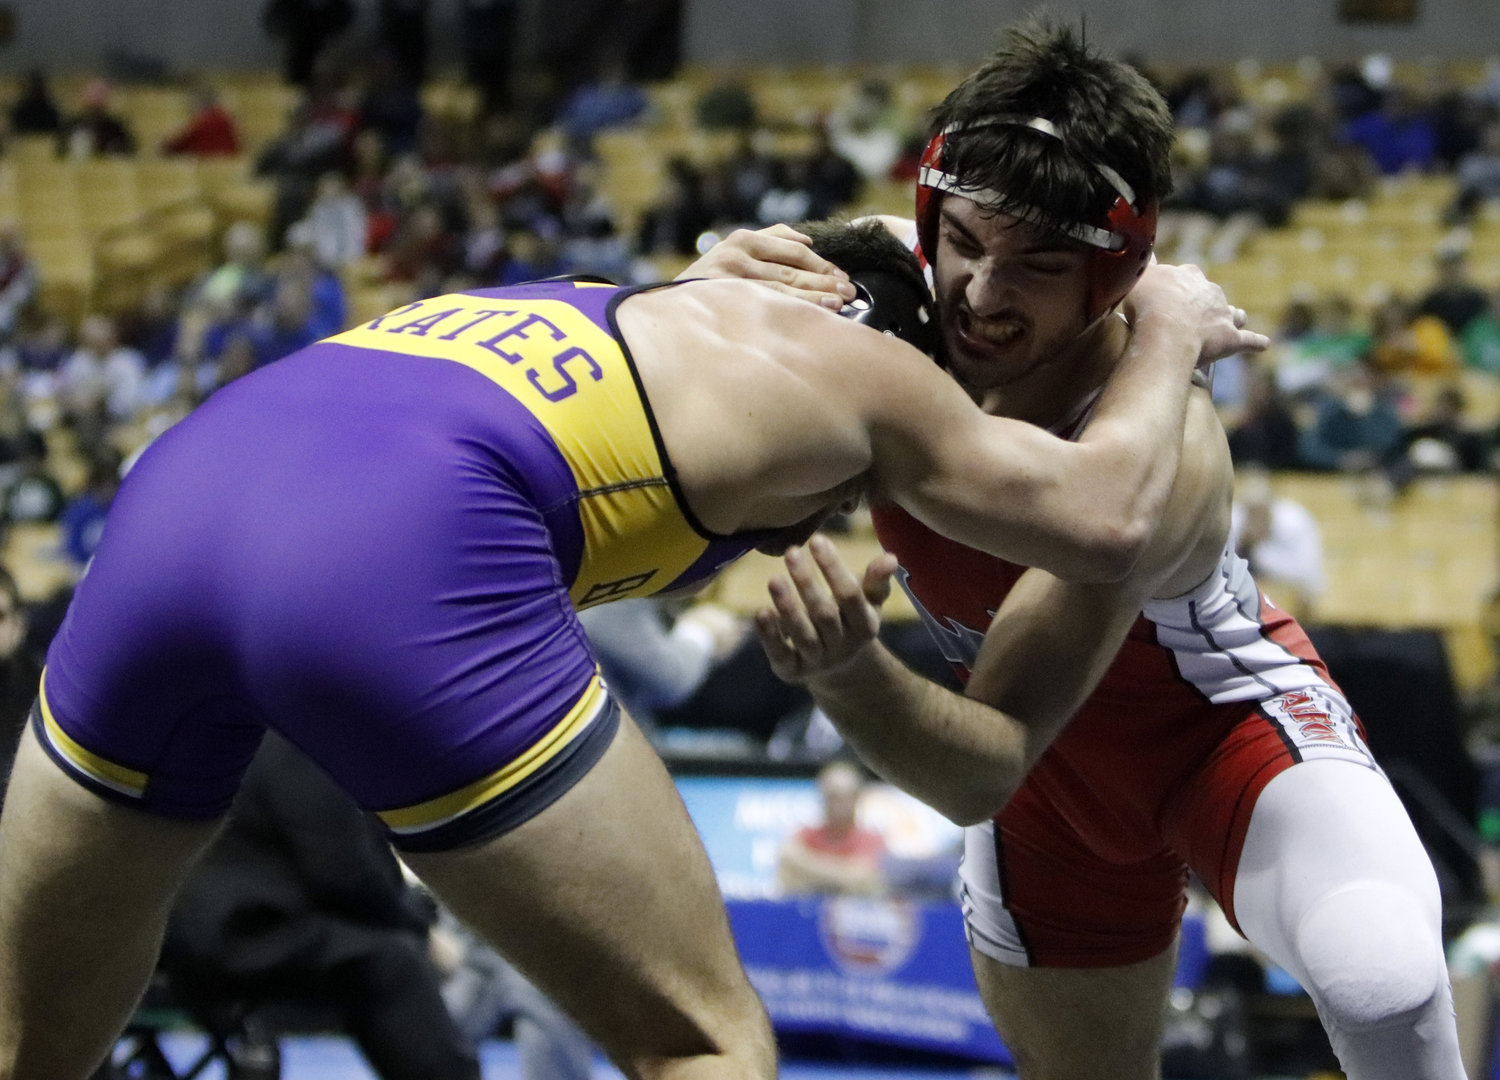 Warrenton junior Jacob Ruff (right) wrestles against Luca Riley of Belton in the Class 3 190-pound championship match.